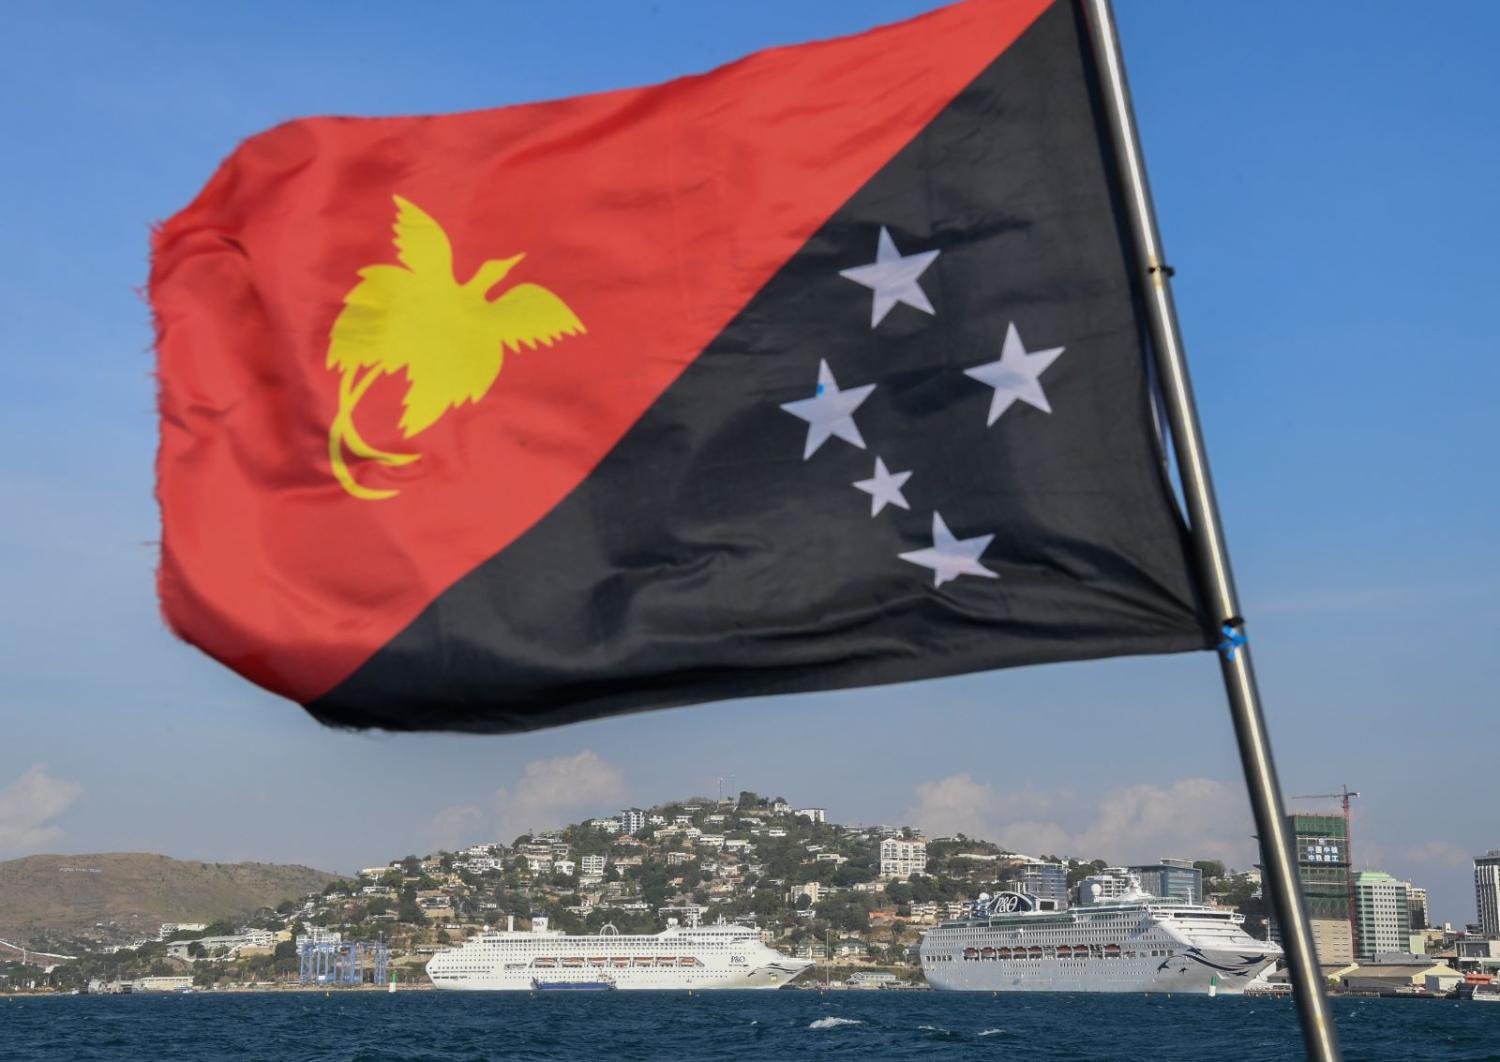 The national flag of PNG flies in front of cruise ships docked for the 2018 APEC Summit in Port Moresby. (Photo: James Morgan/Getty)